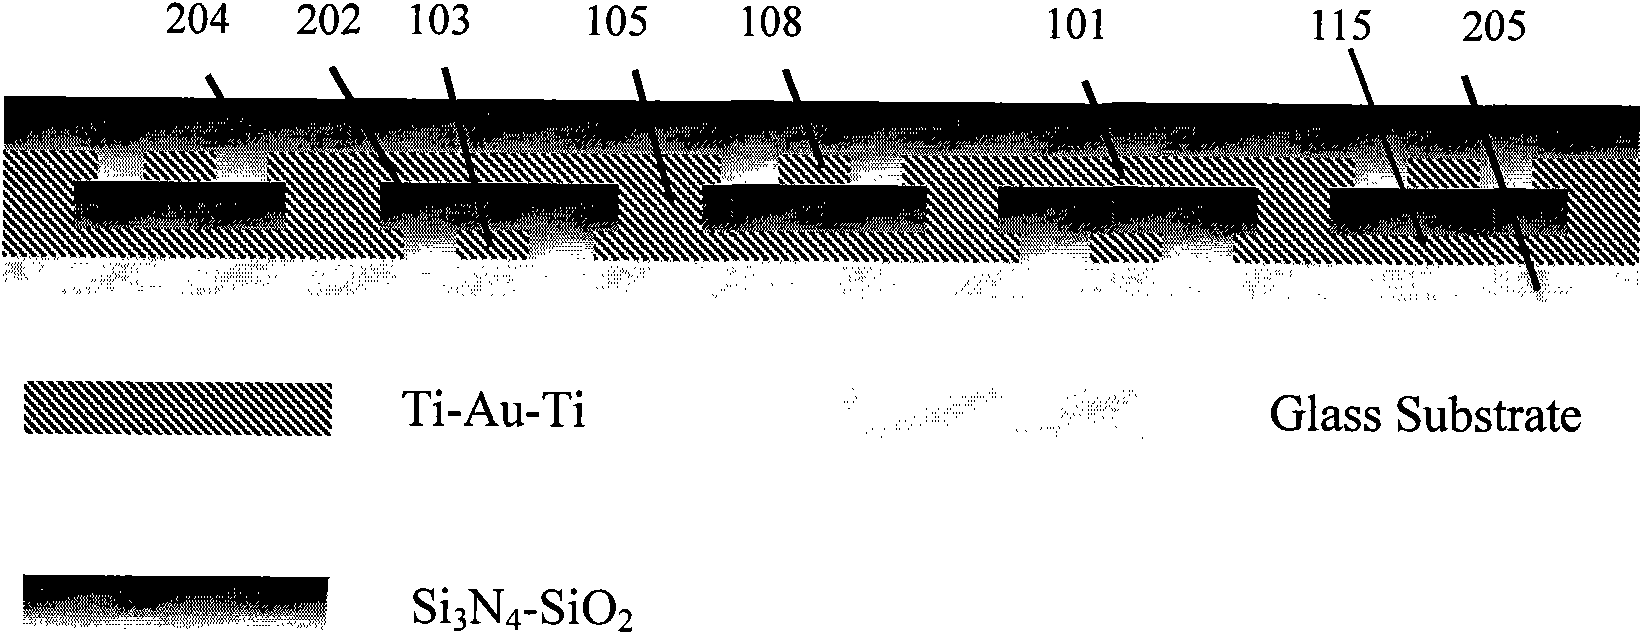 Microelectrode array device and special device for cell manipulation and electrophysiological signal detection